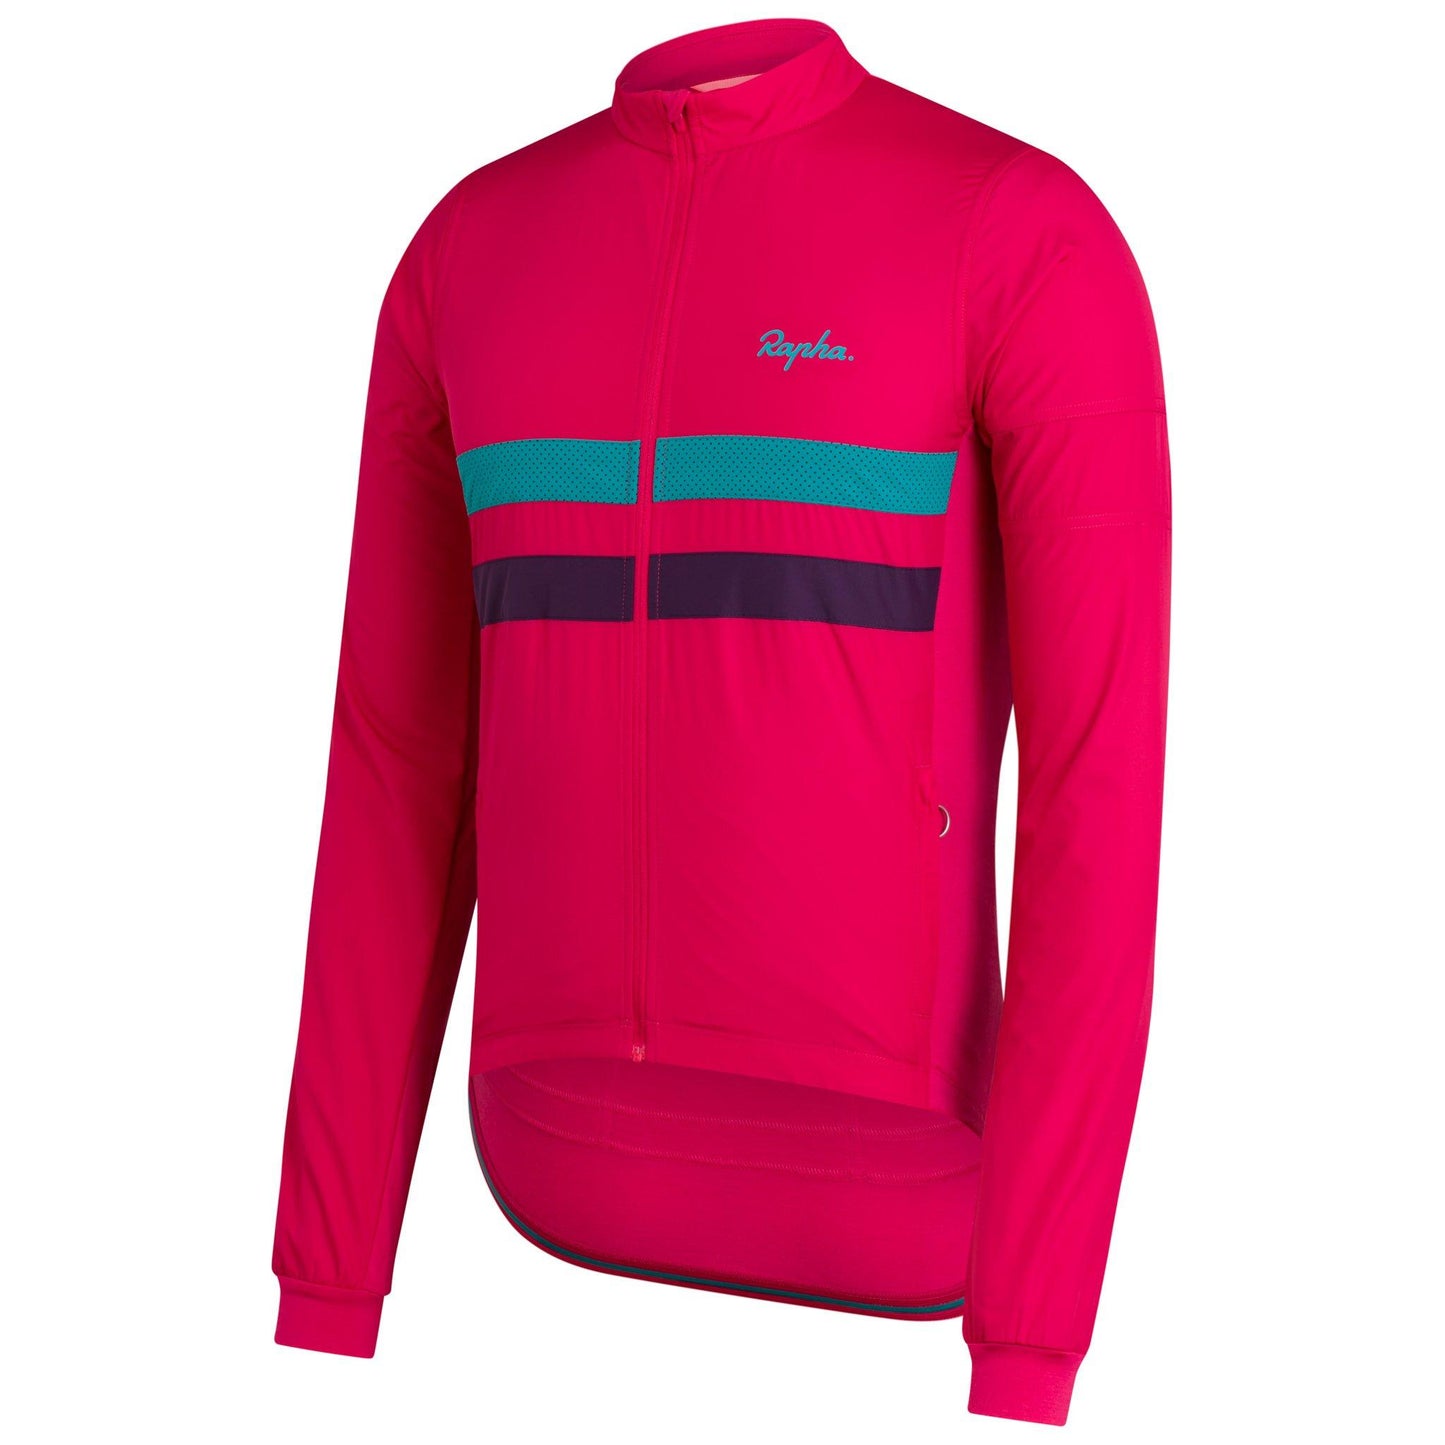 Rapha Mens Brevet Long Sleeve Windblock Jersey - Pink buy online at Woolys Wheels Sydney with free delivery